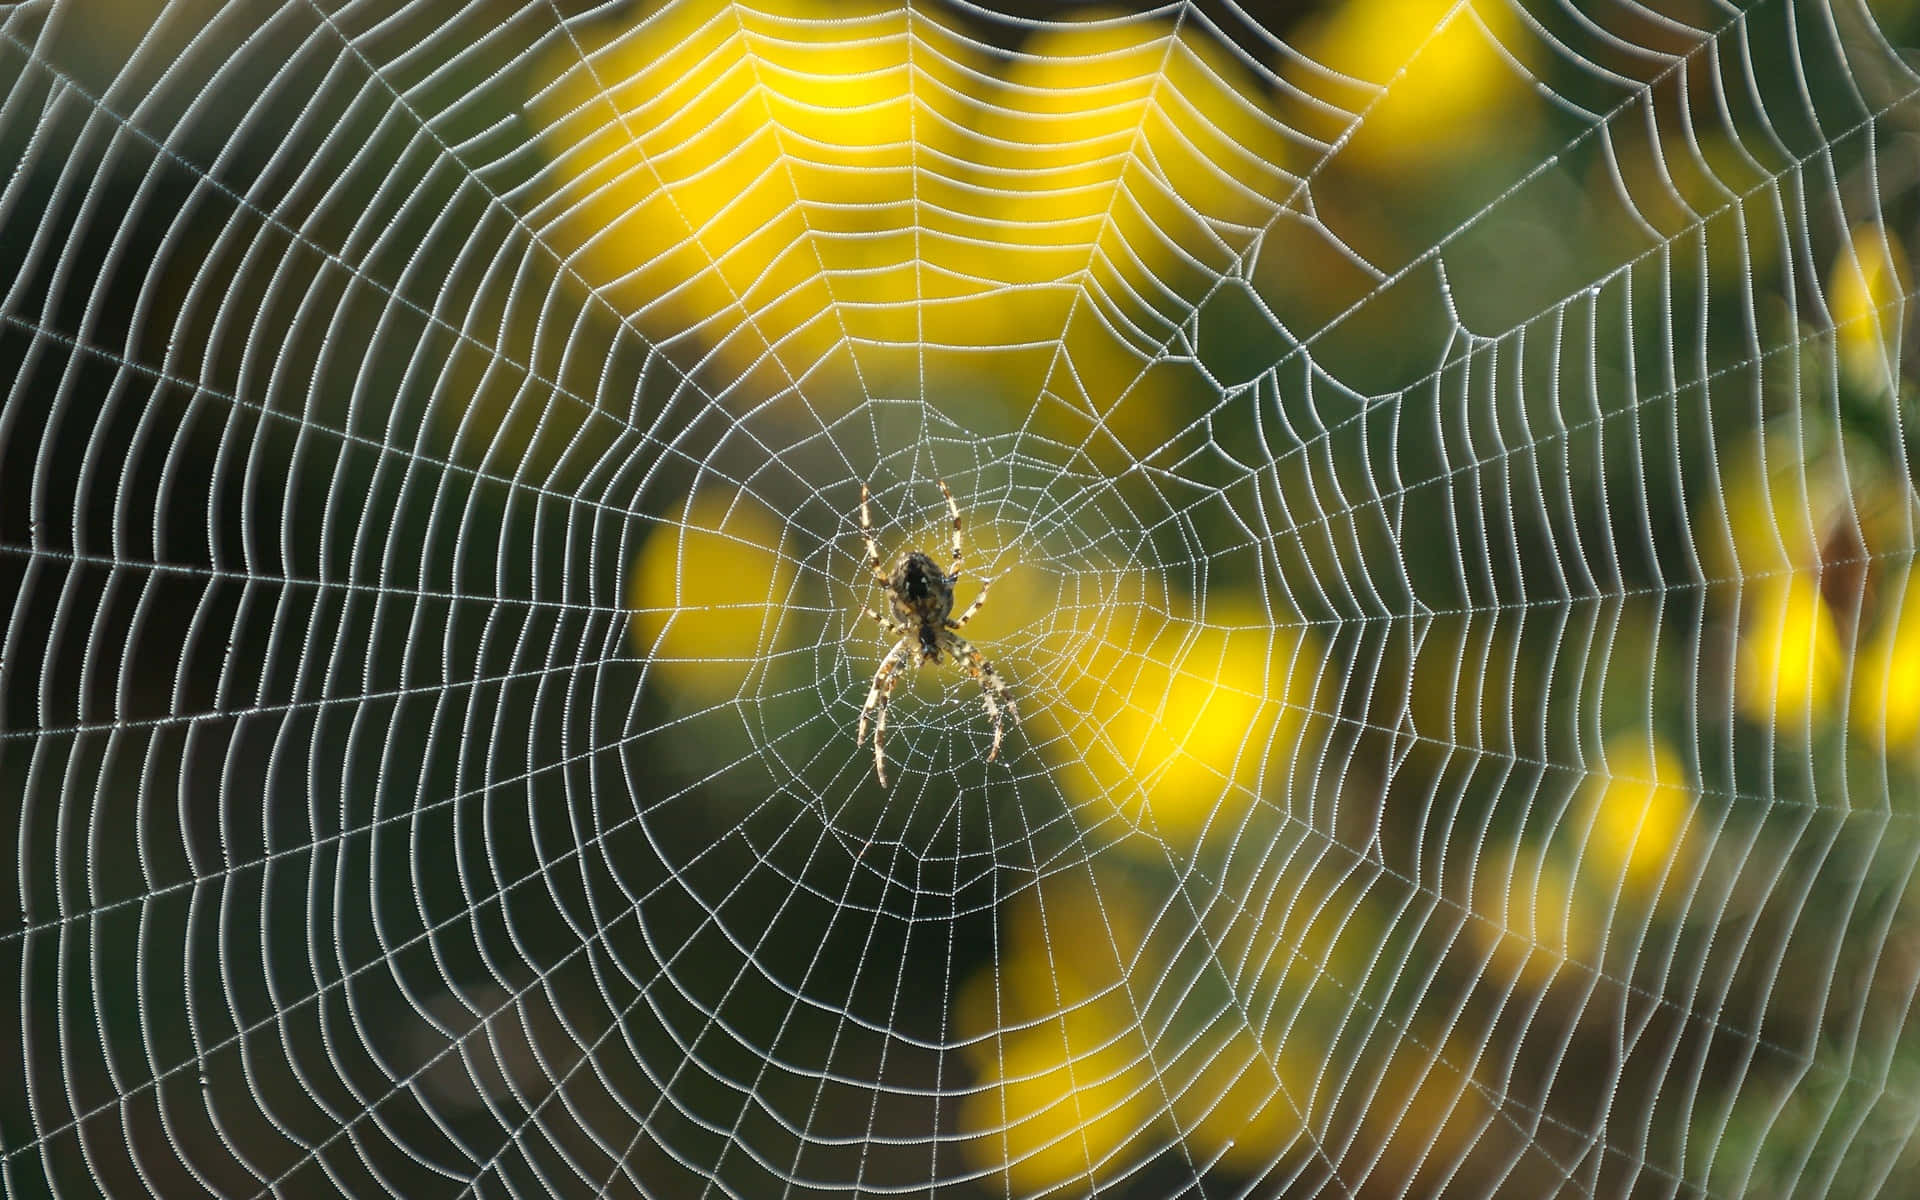 This beautiful golden colored spider is perched on a web.